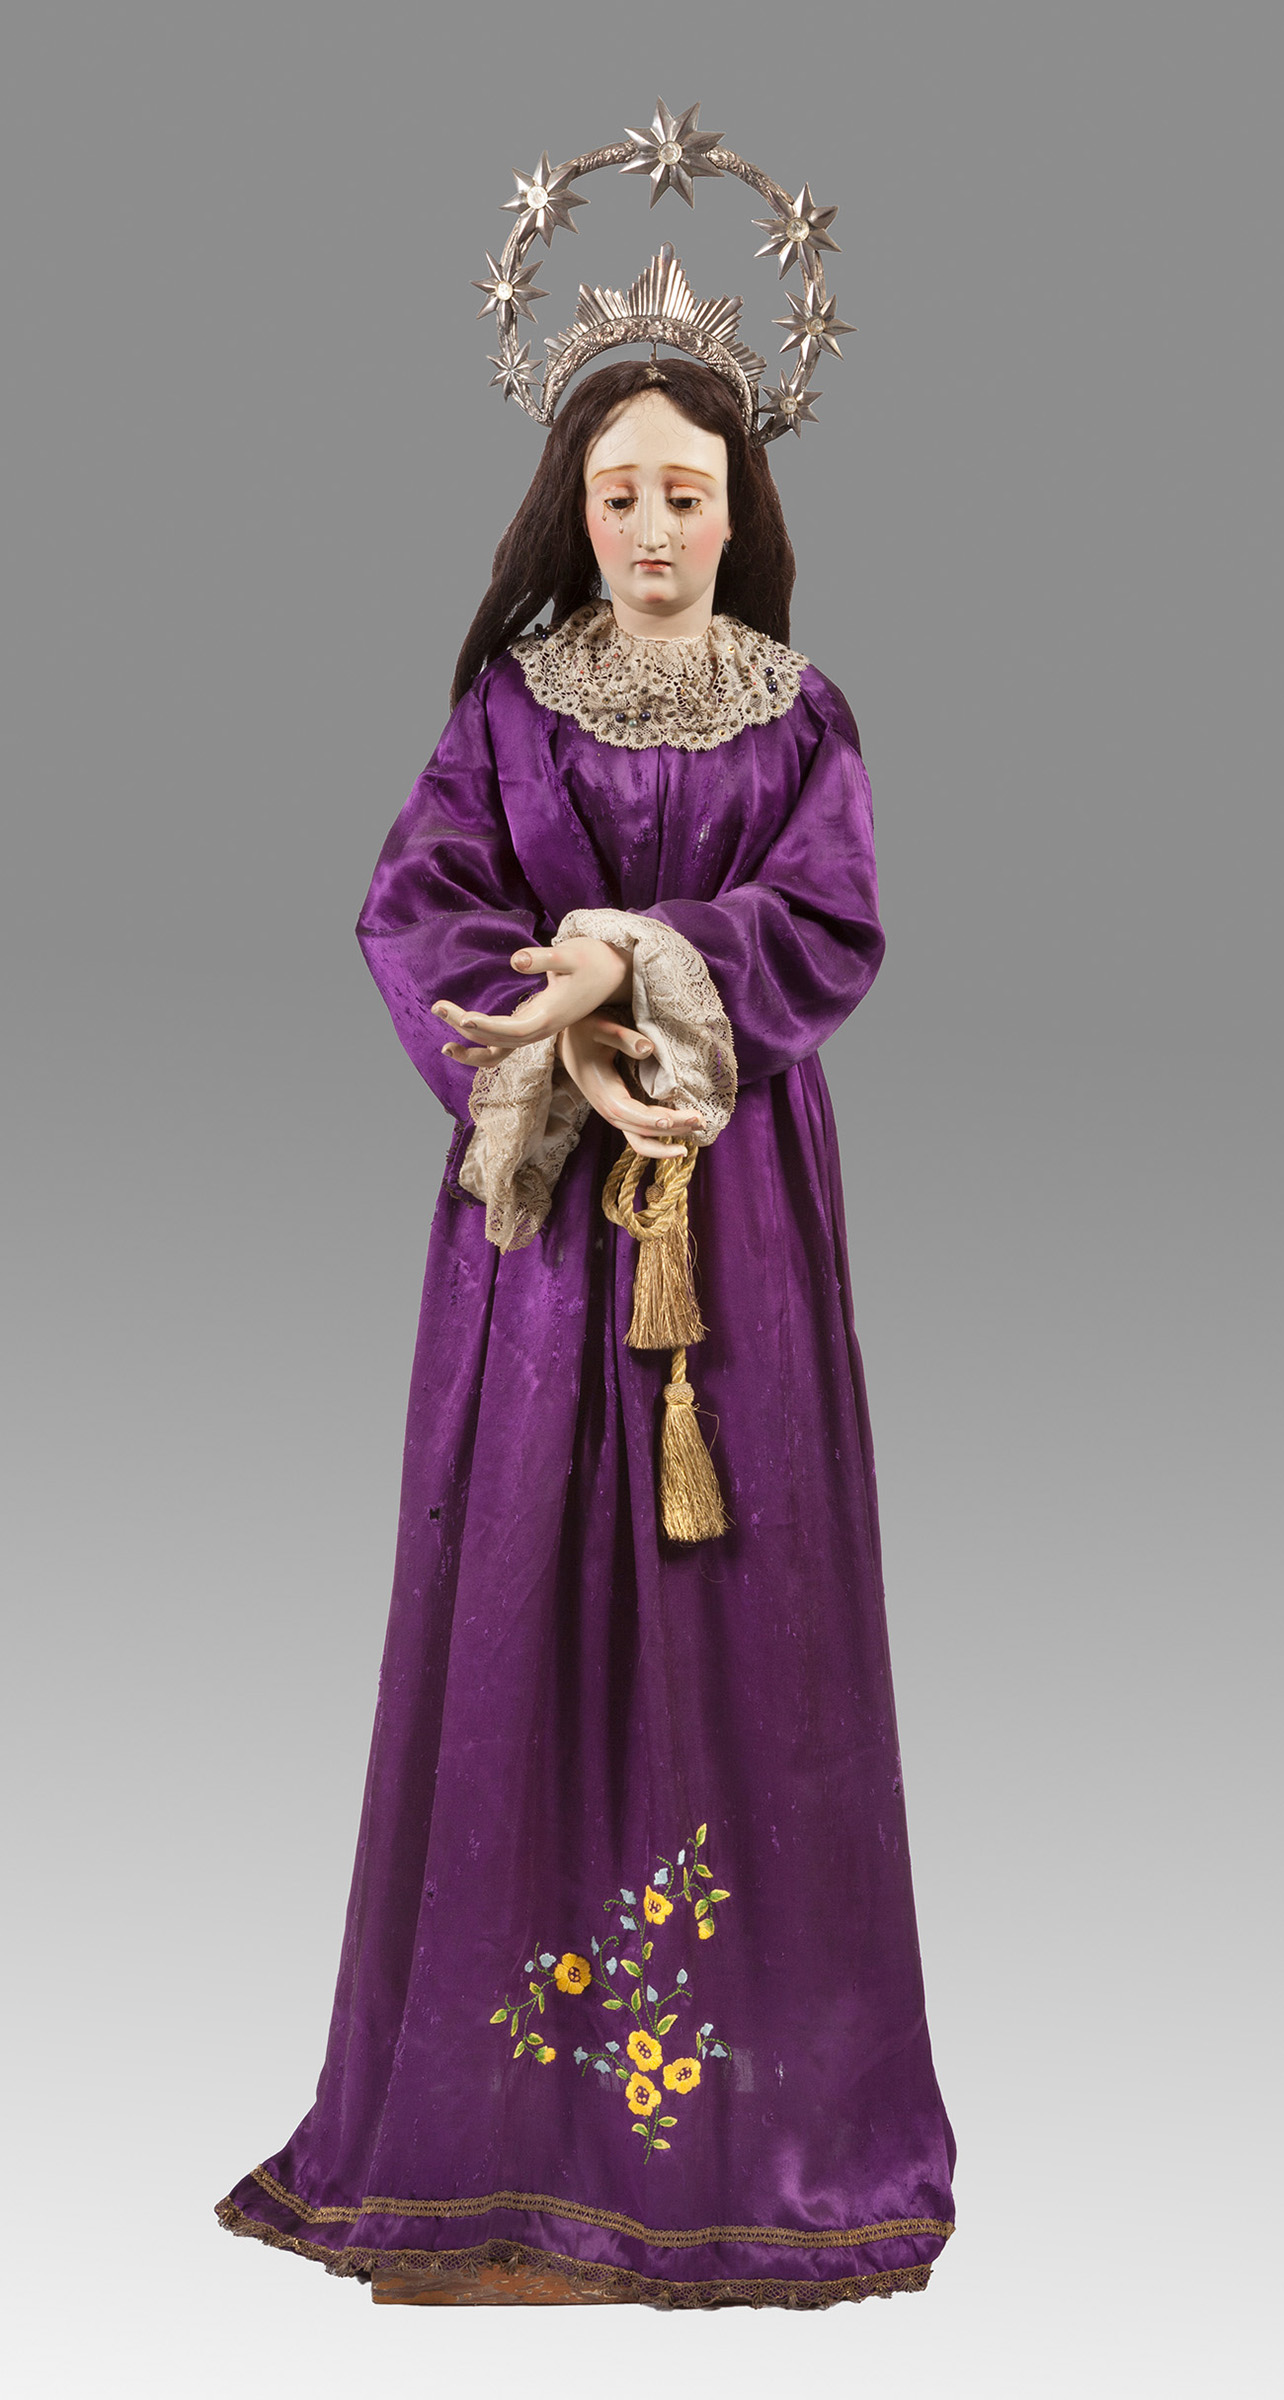 Virgen de los Dolores Cap i pota, late 18th-early 19th century.Carved and polychrome wood, with